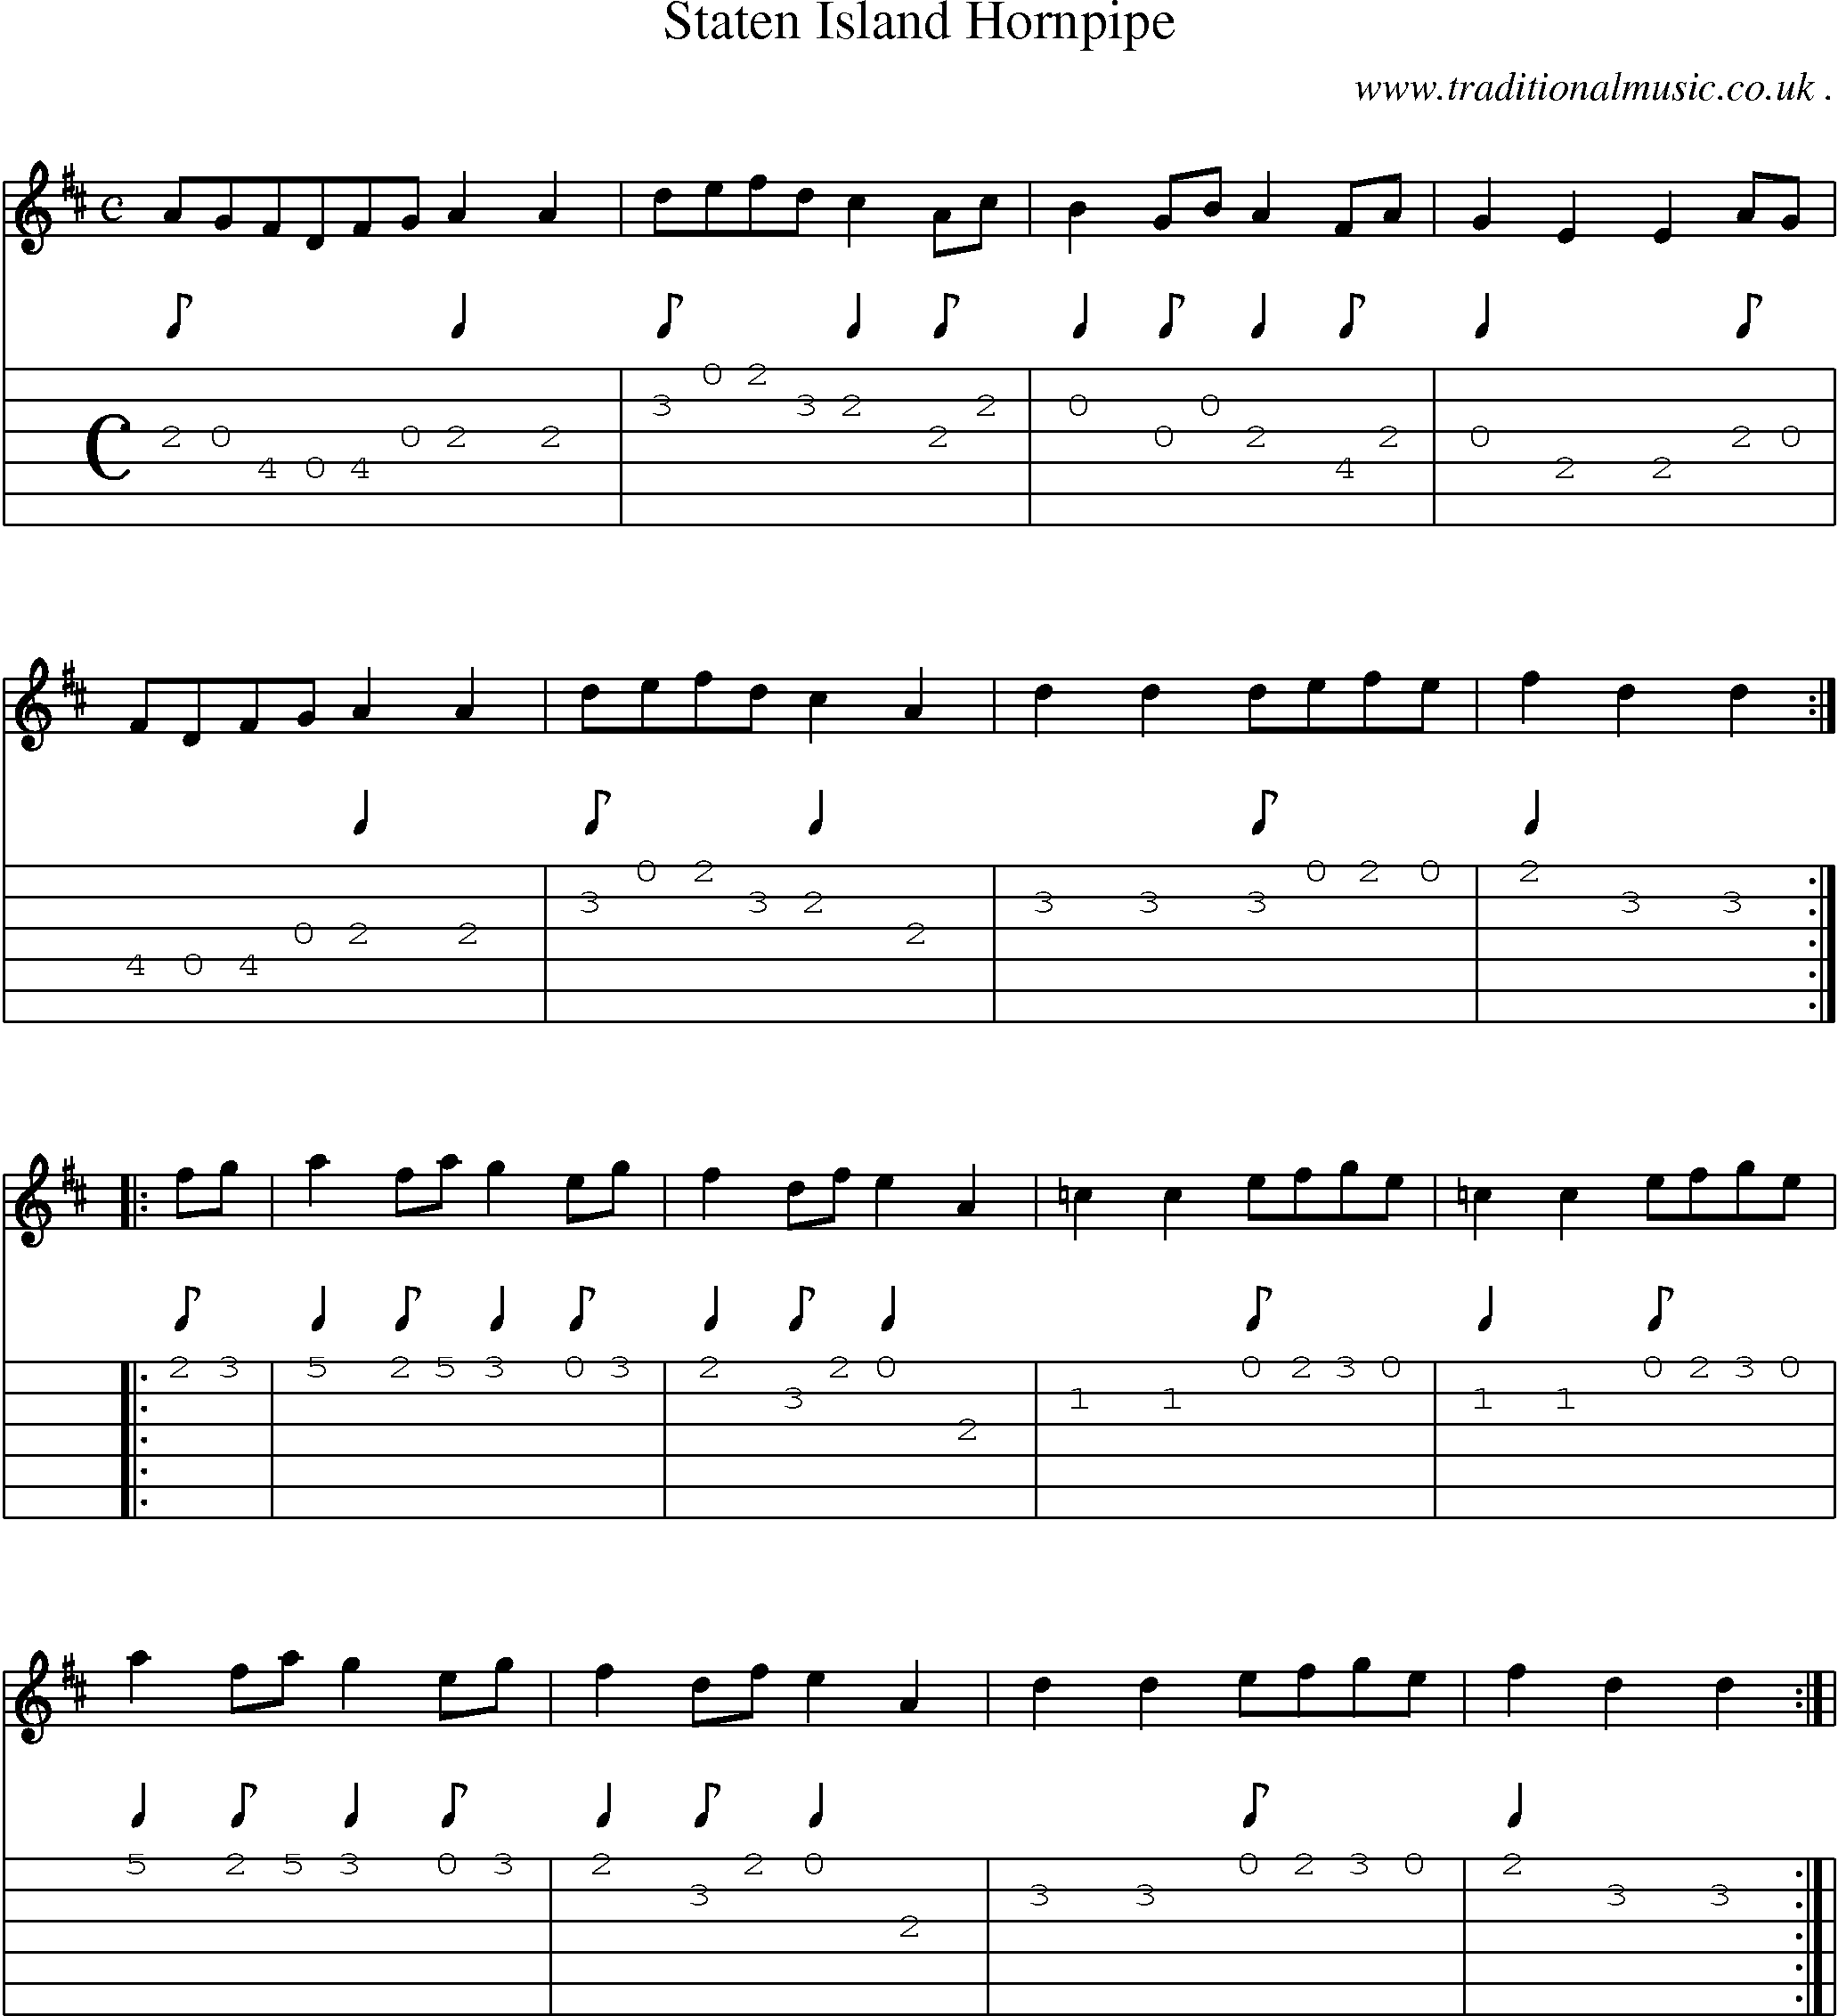 Sheet-Music and Guitar Tabs for Staten Island Hornpipe